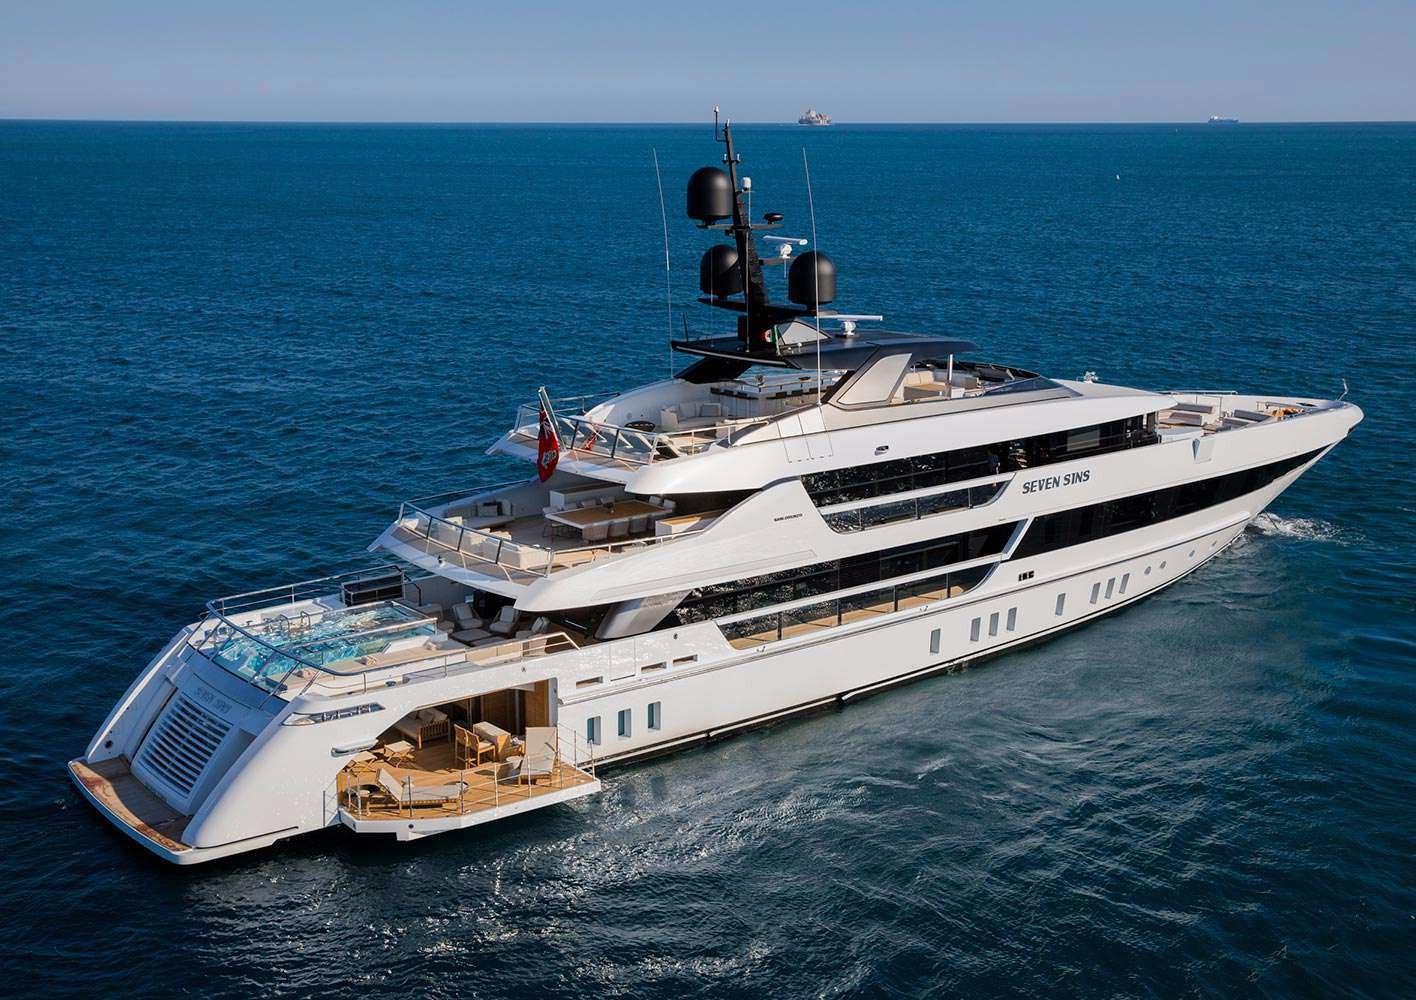 52 ft yachts for sale